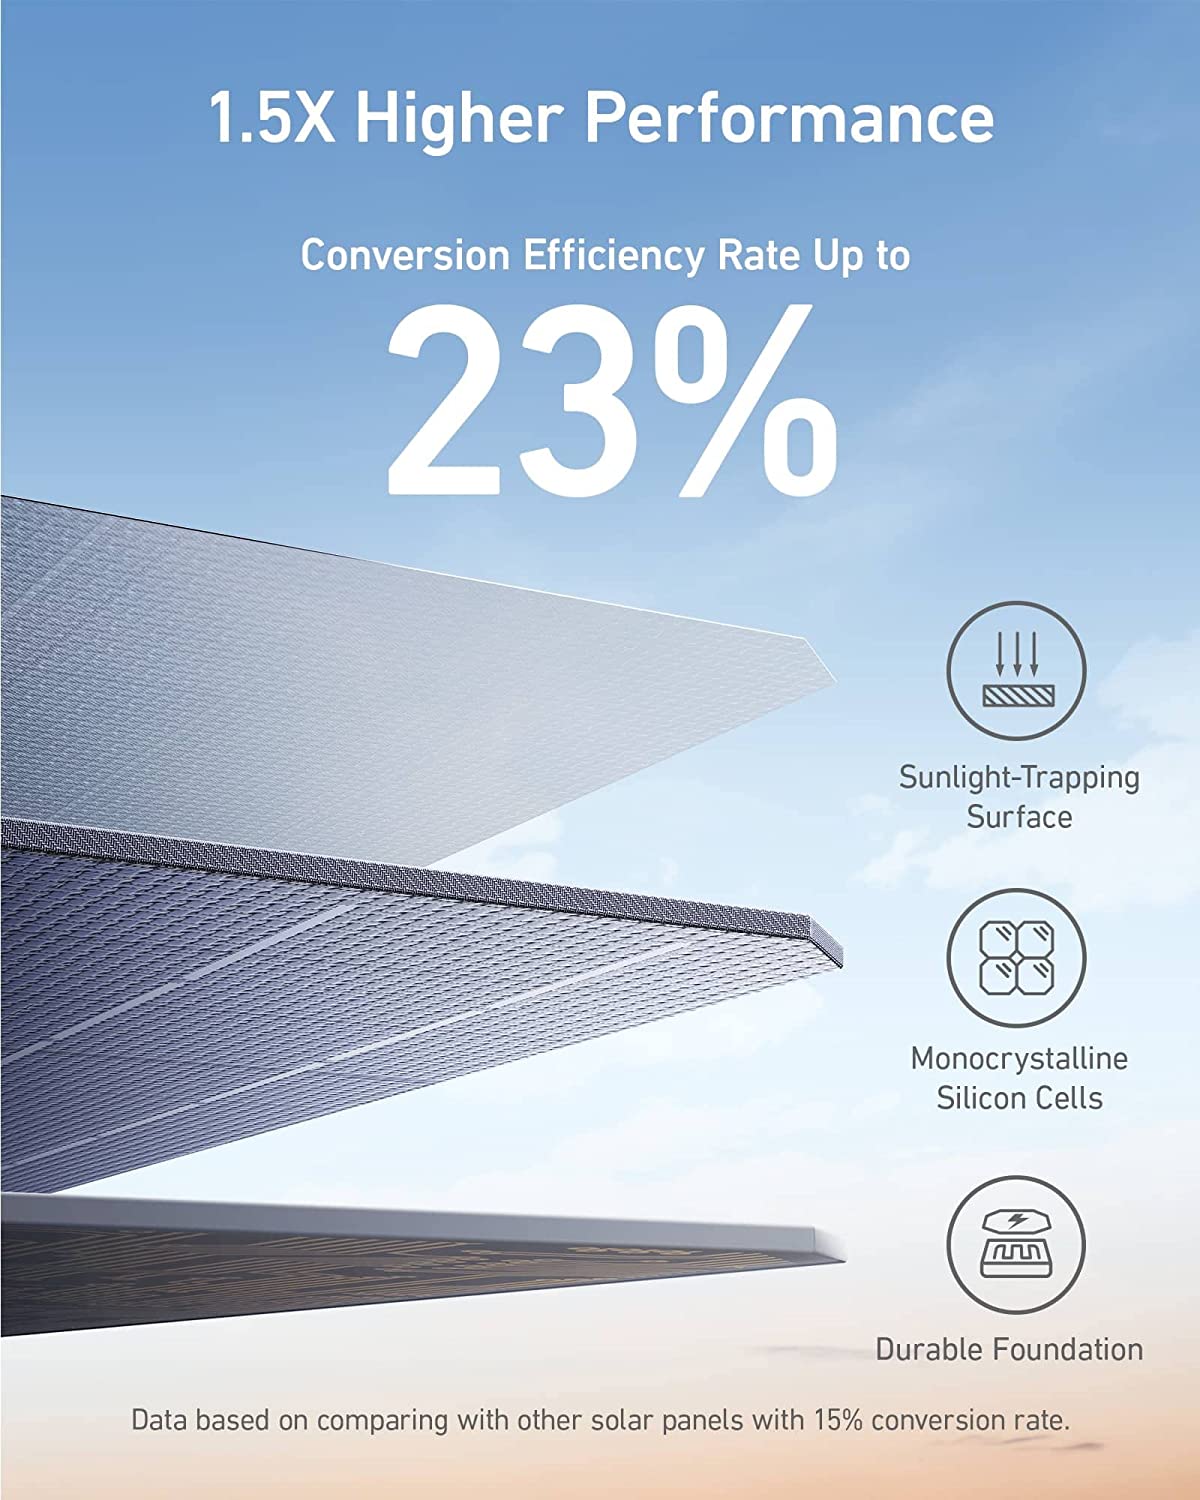 Experience 23% Conversion Efficiency With The Anker 625 Solar Panel